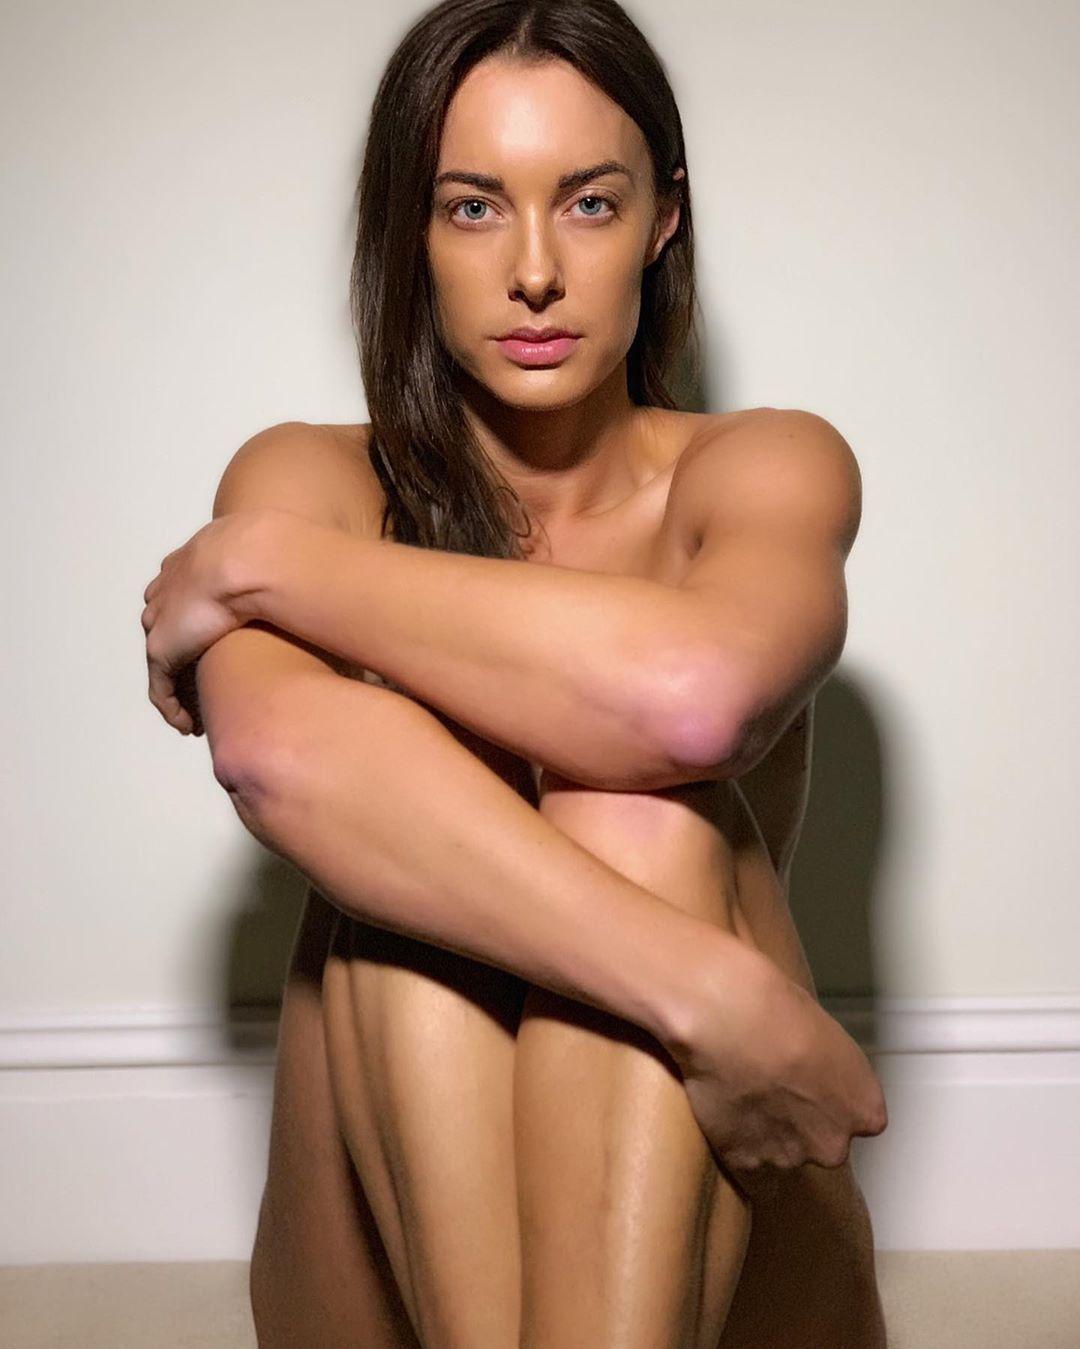 51 Hot Pictures Of Emily Hartridge That Will Make Your Heart Pound For Her | Best Of Comic Books